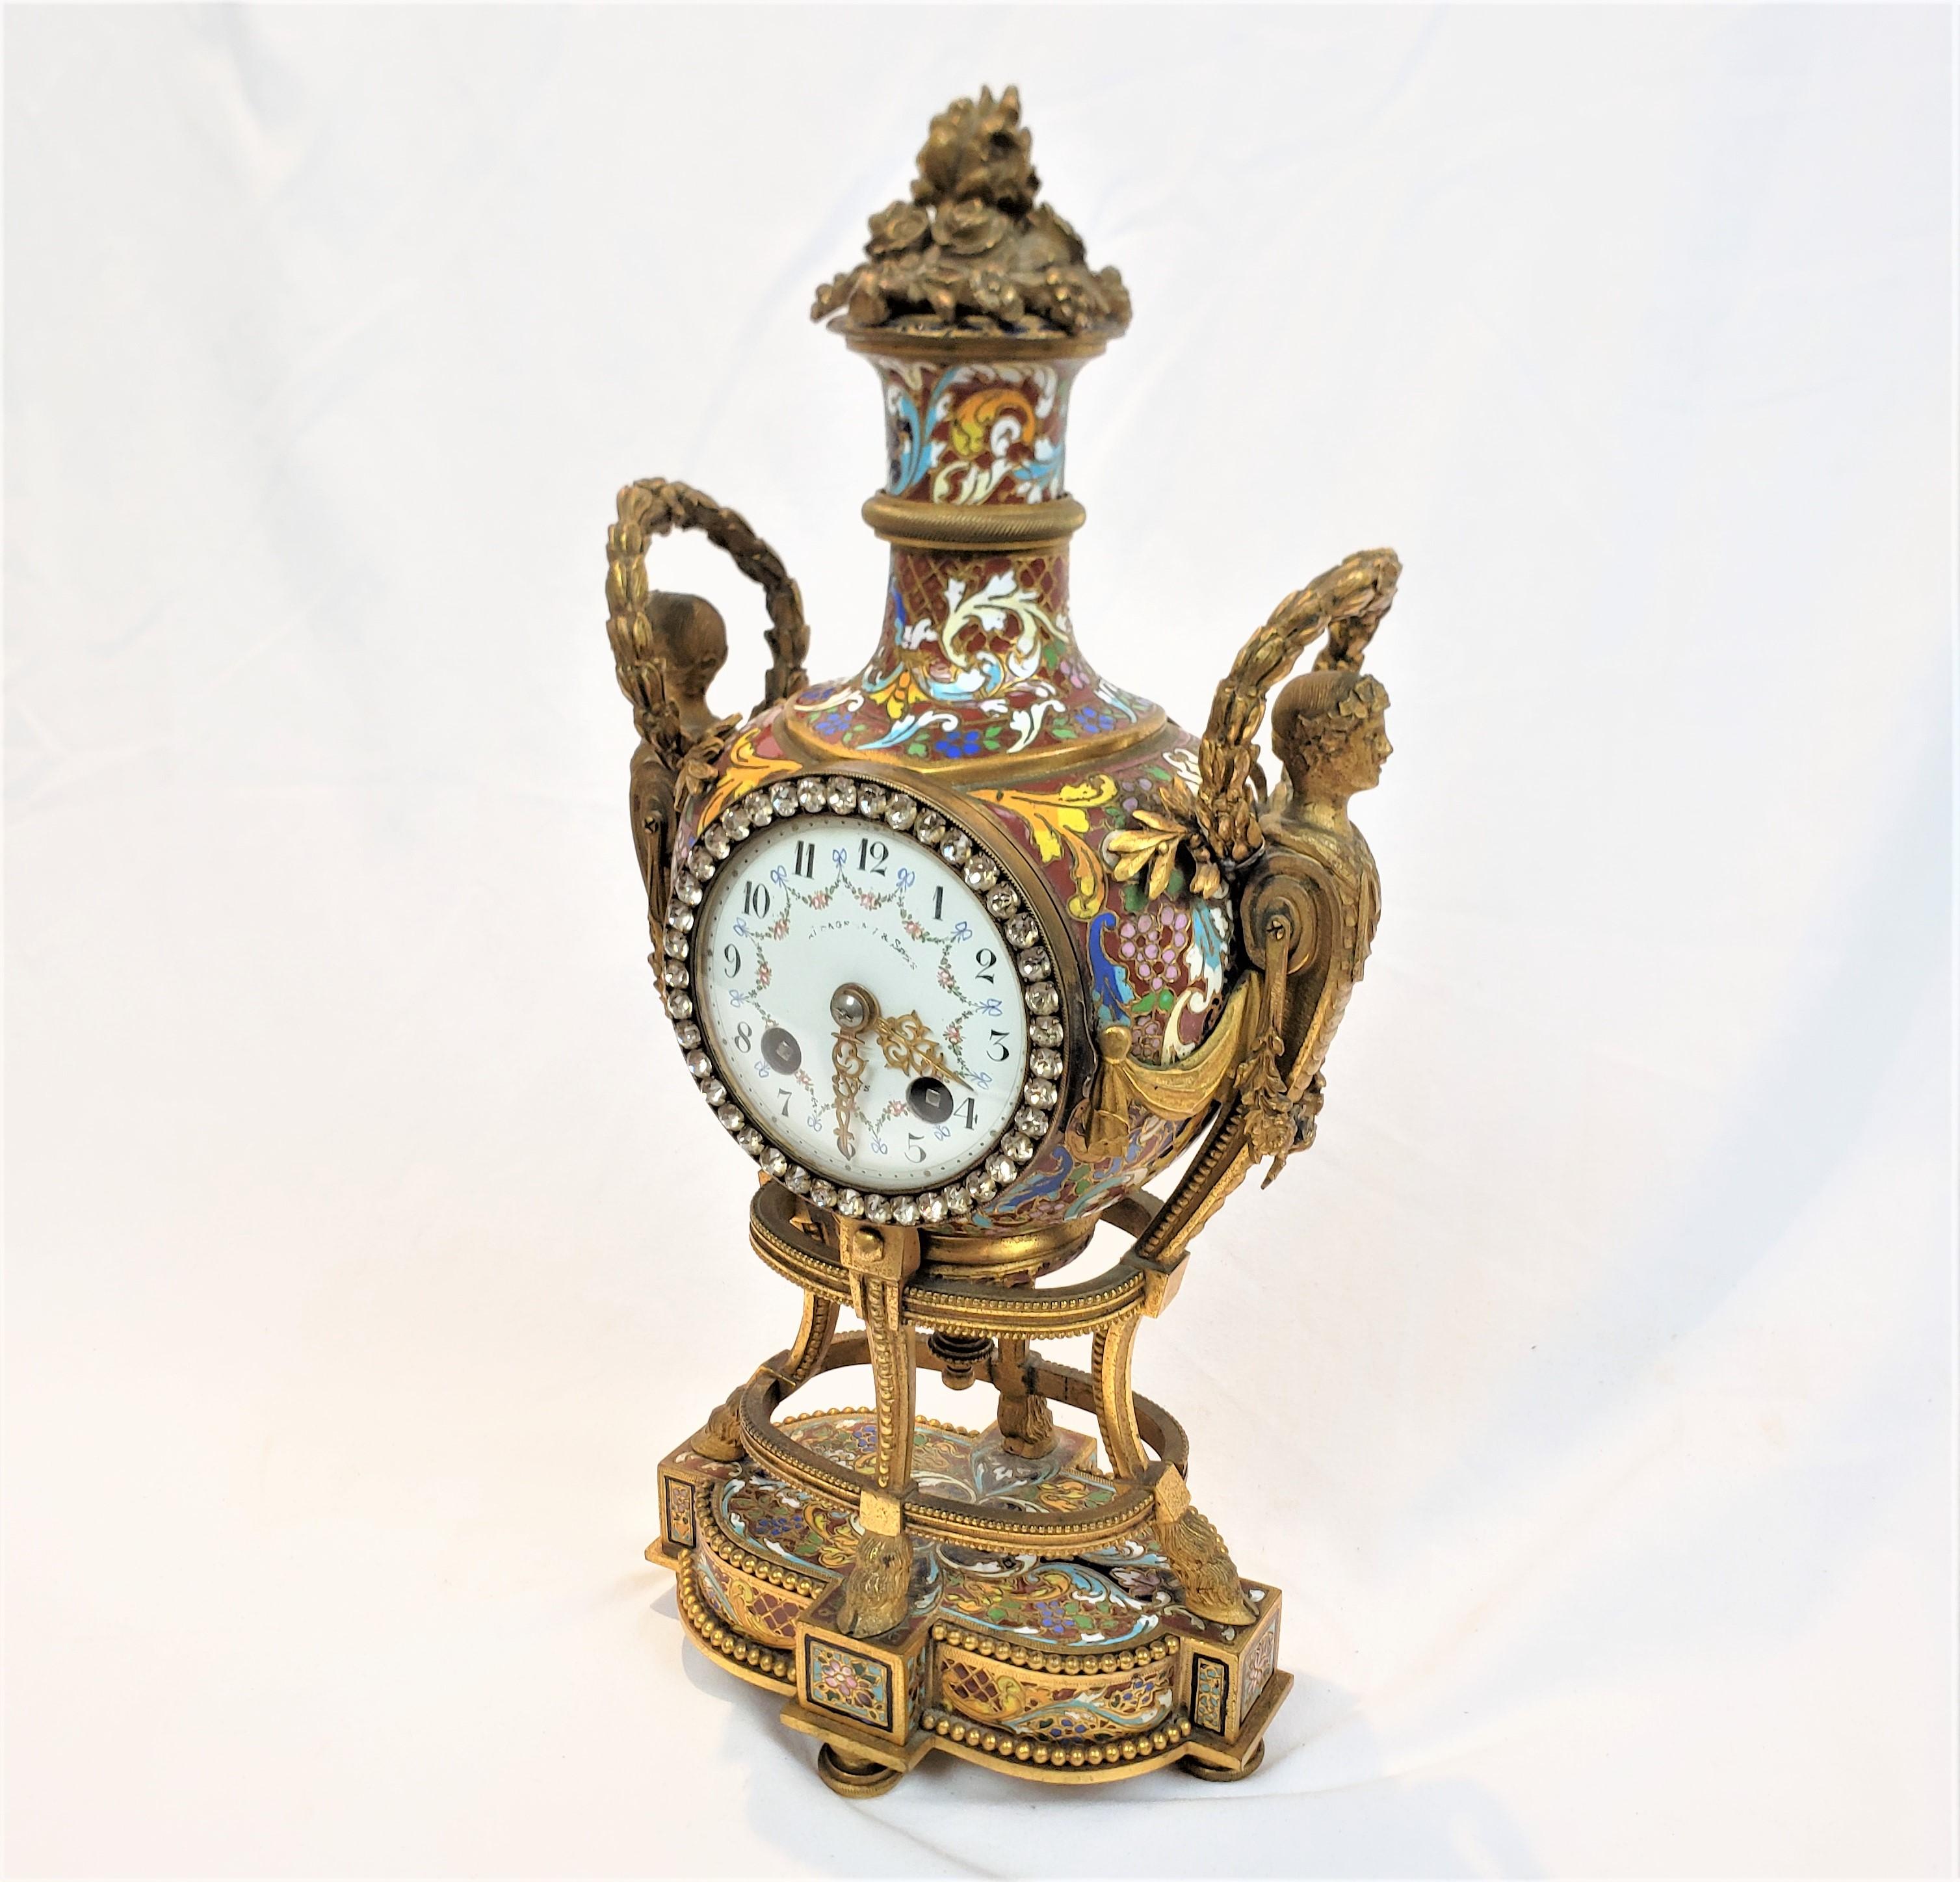 This 'Marie Anoinette' antique clock is signed on the face by an unknown maker, and originated from France and dating to approximately 1880 and done in the period Louis XVI style. The clock case is comosed of cast bronze with a gilt or ormolu